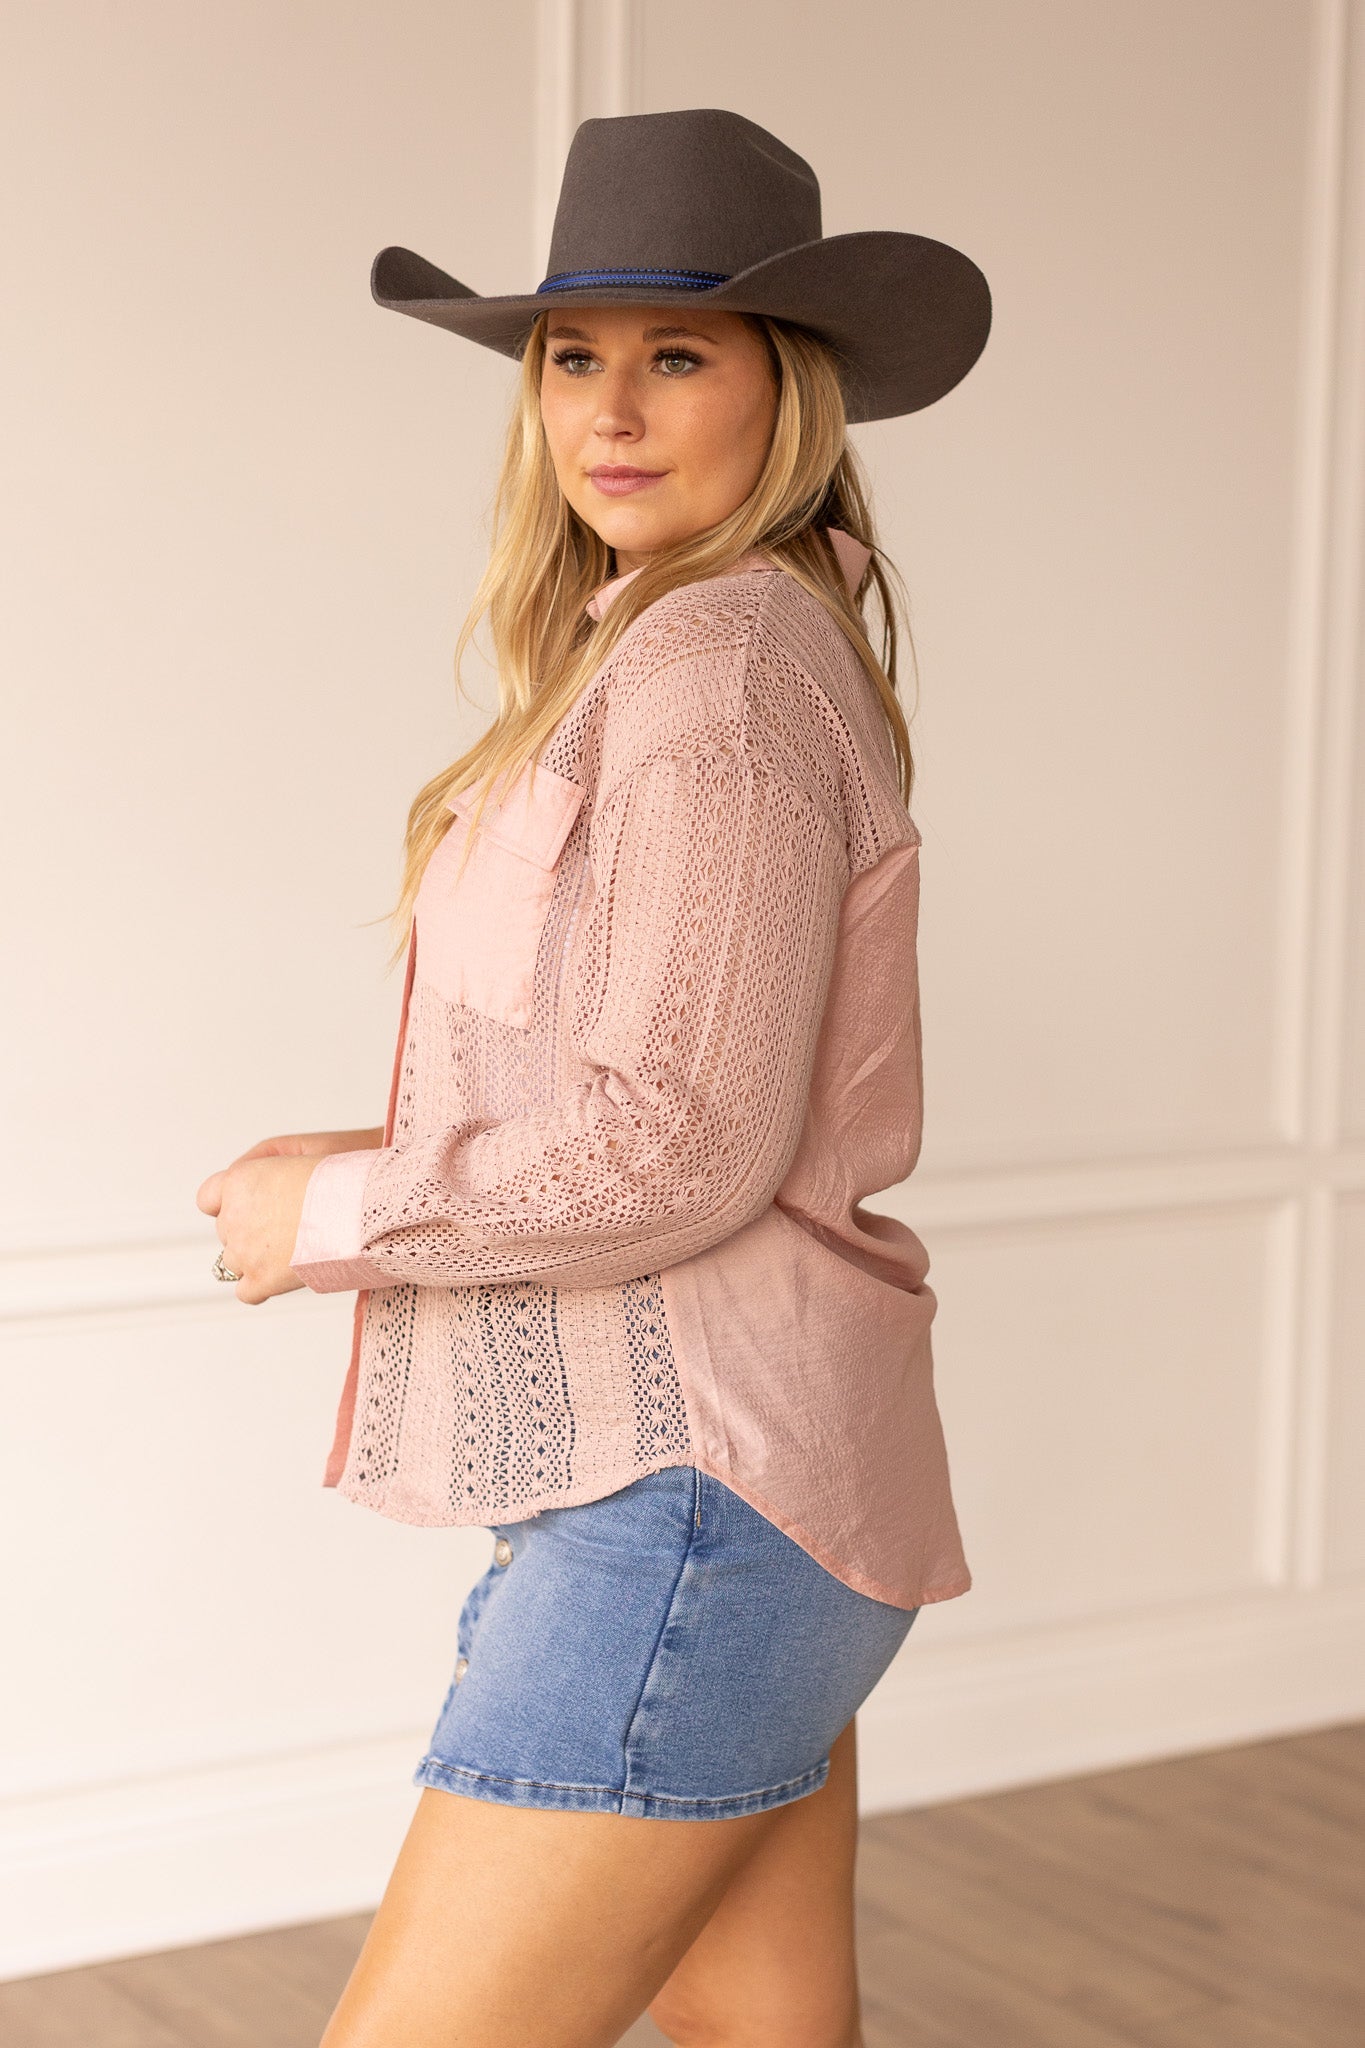 Lace Button Up, Pink